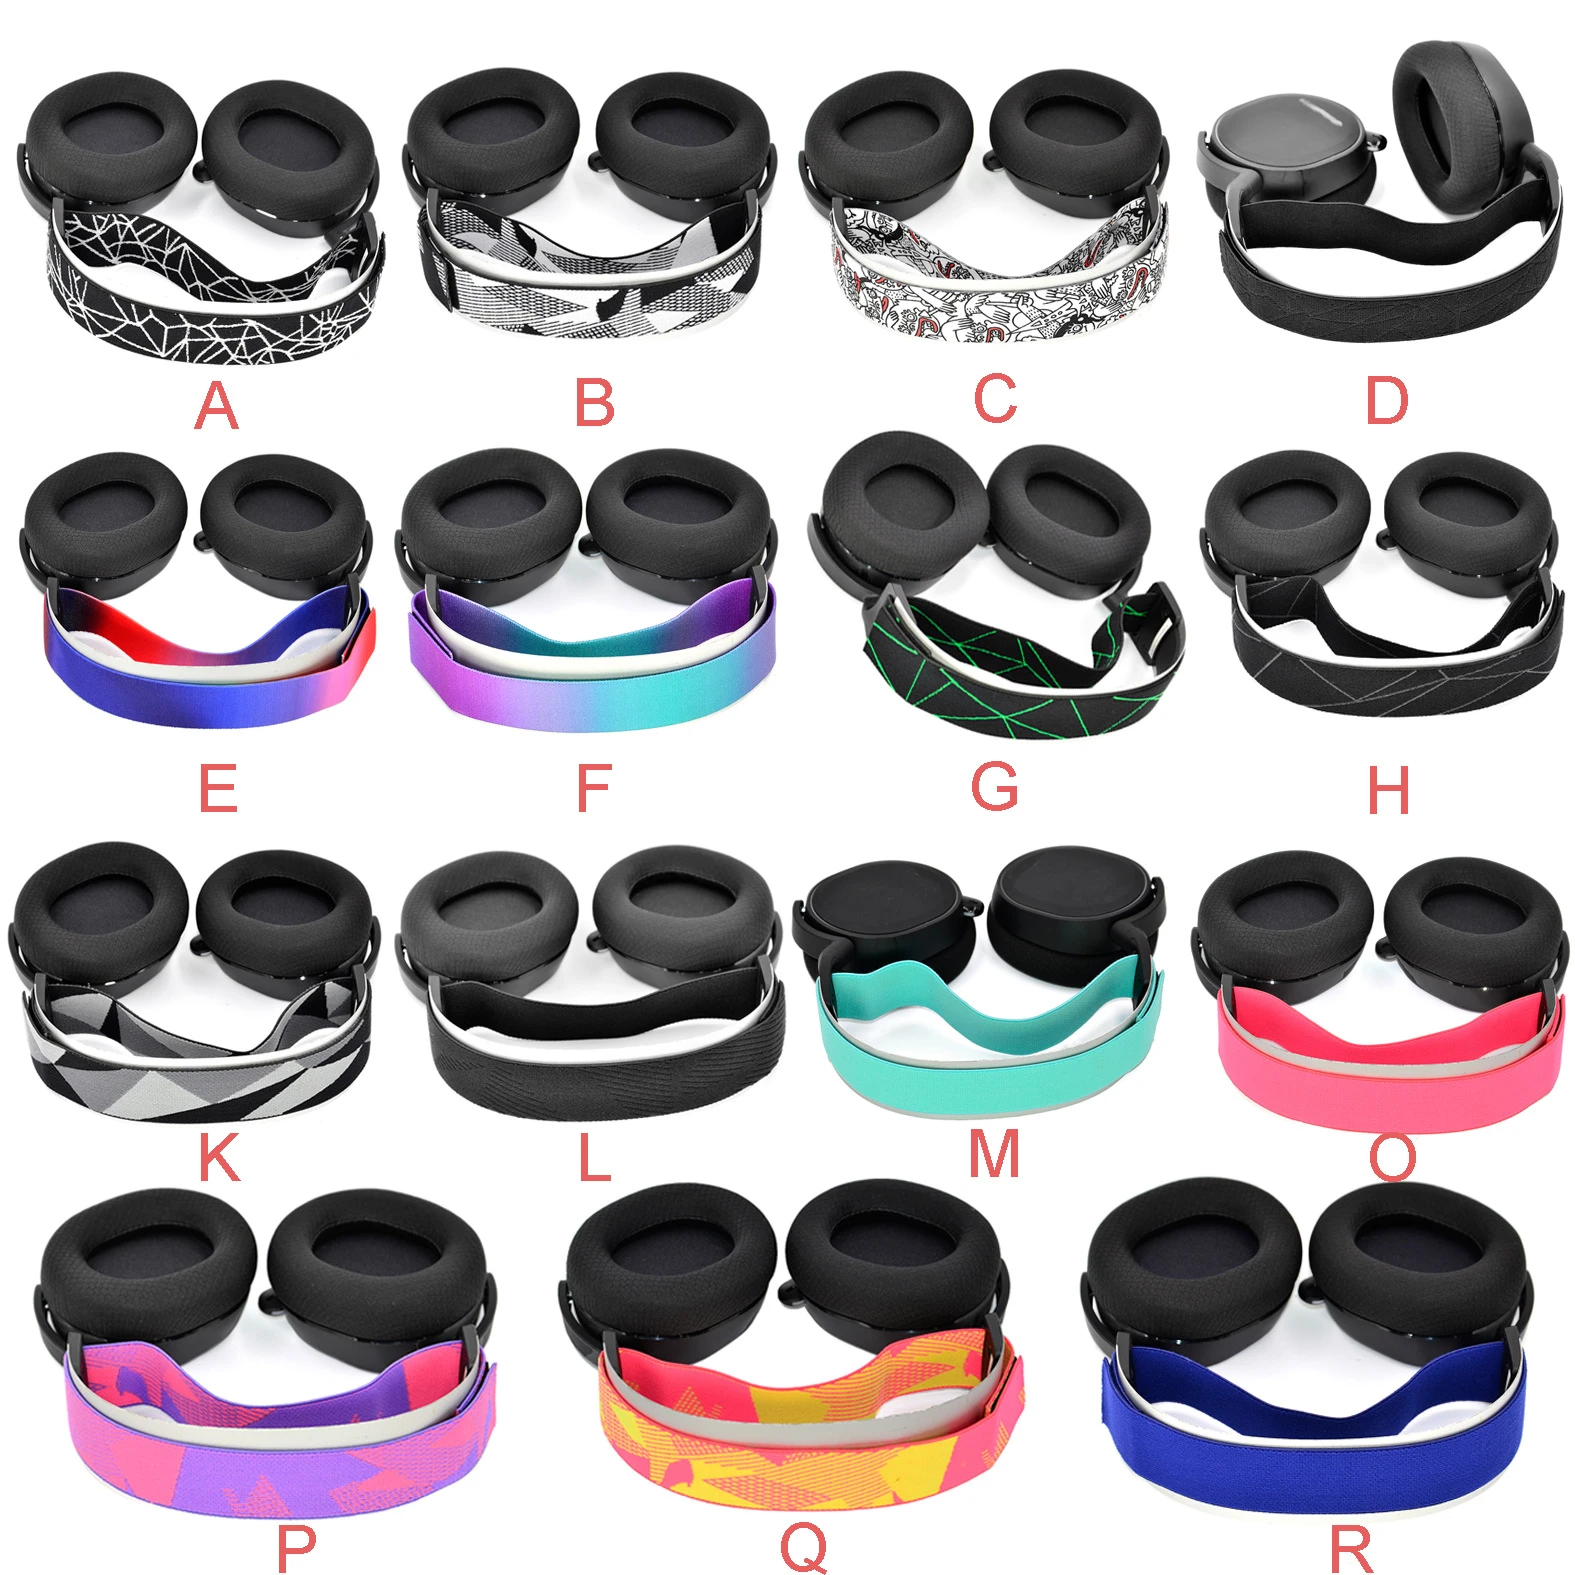 Replacement Headphone Headband Ear Pads for Steelseries Arctis 7 / 7 Pro Headphones High Quality More Colors